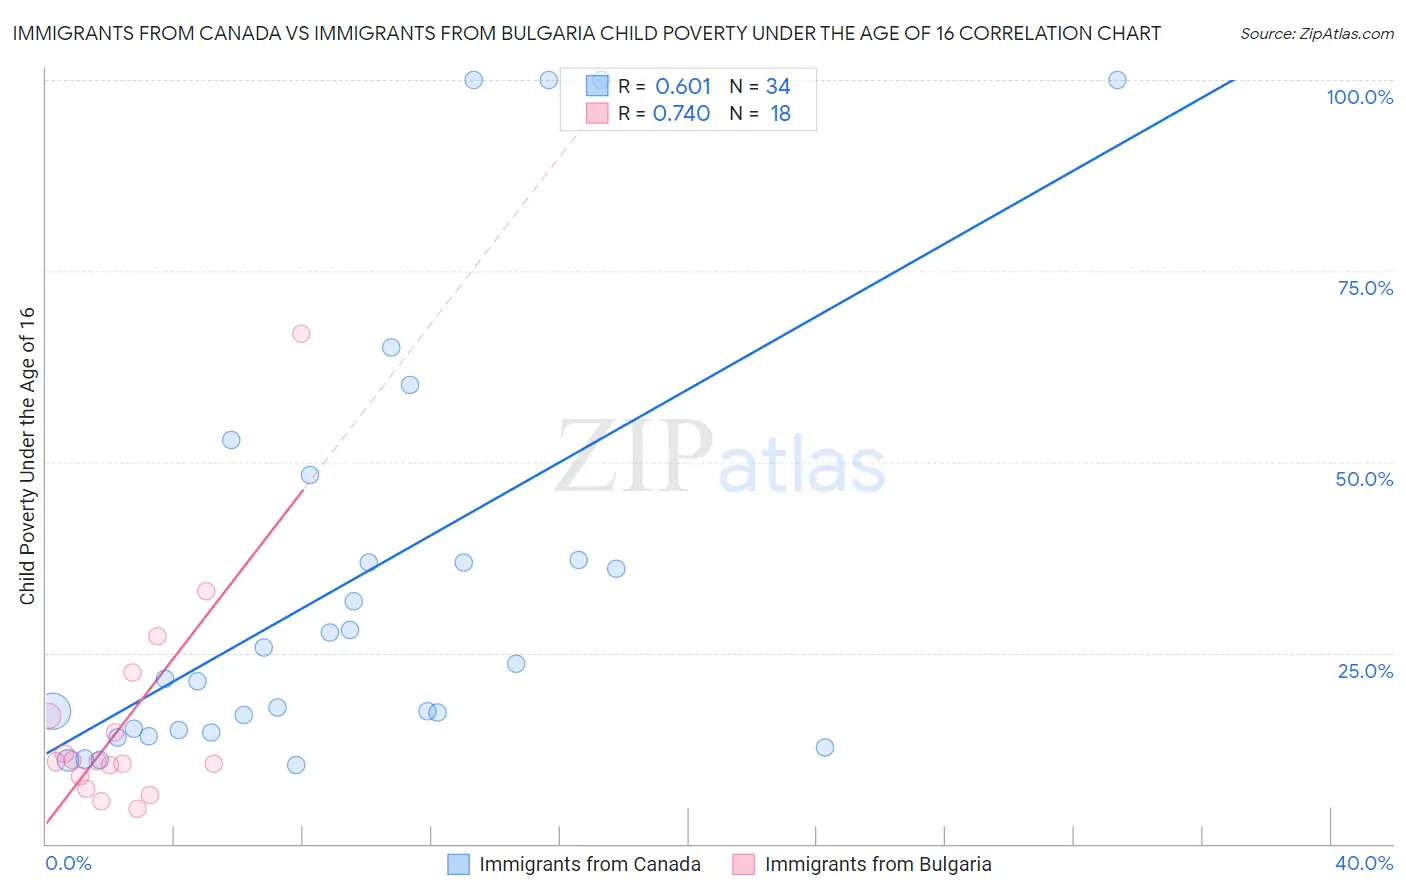 Immigrants from Canada vs Immigrants from Bulgaria Child Poverty Under the Age of 16